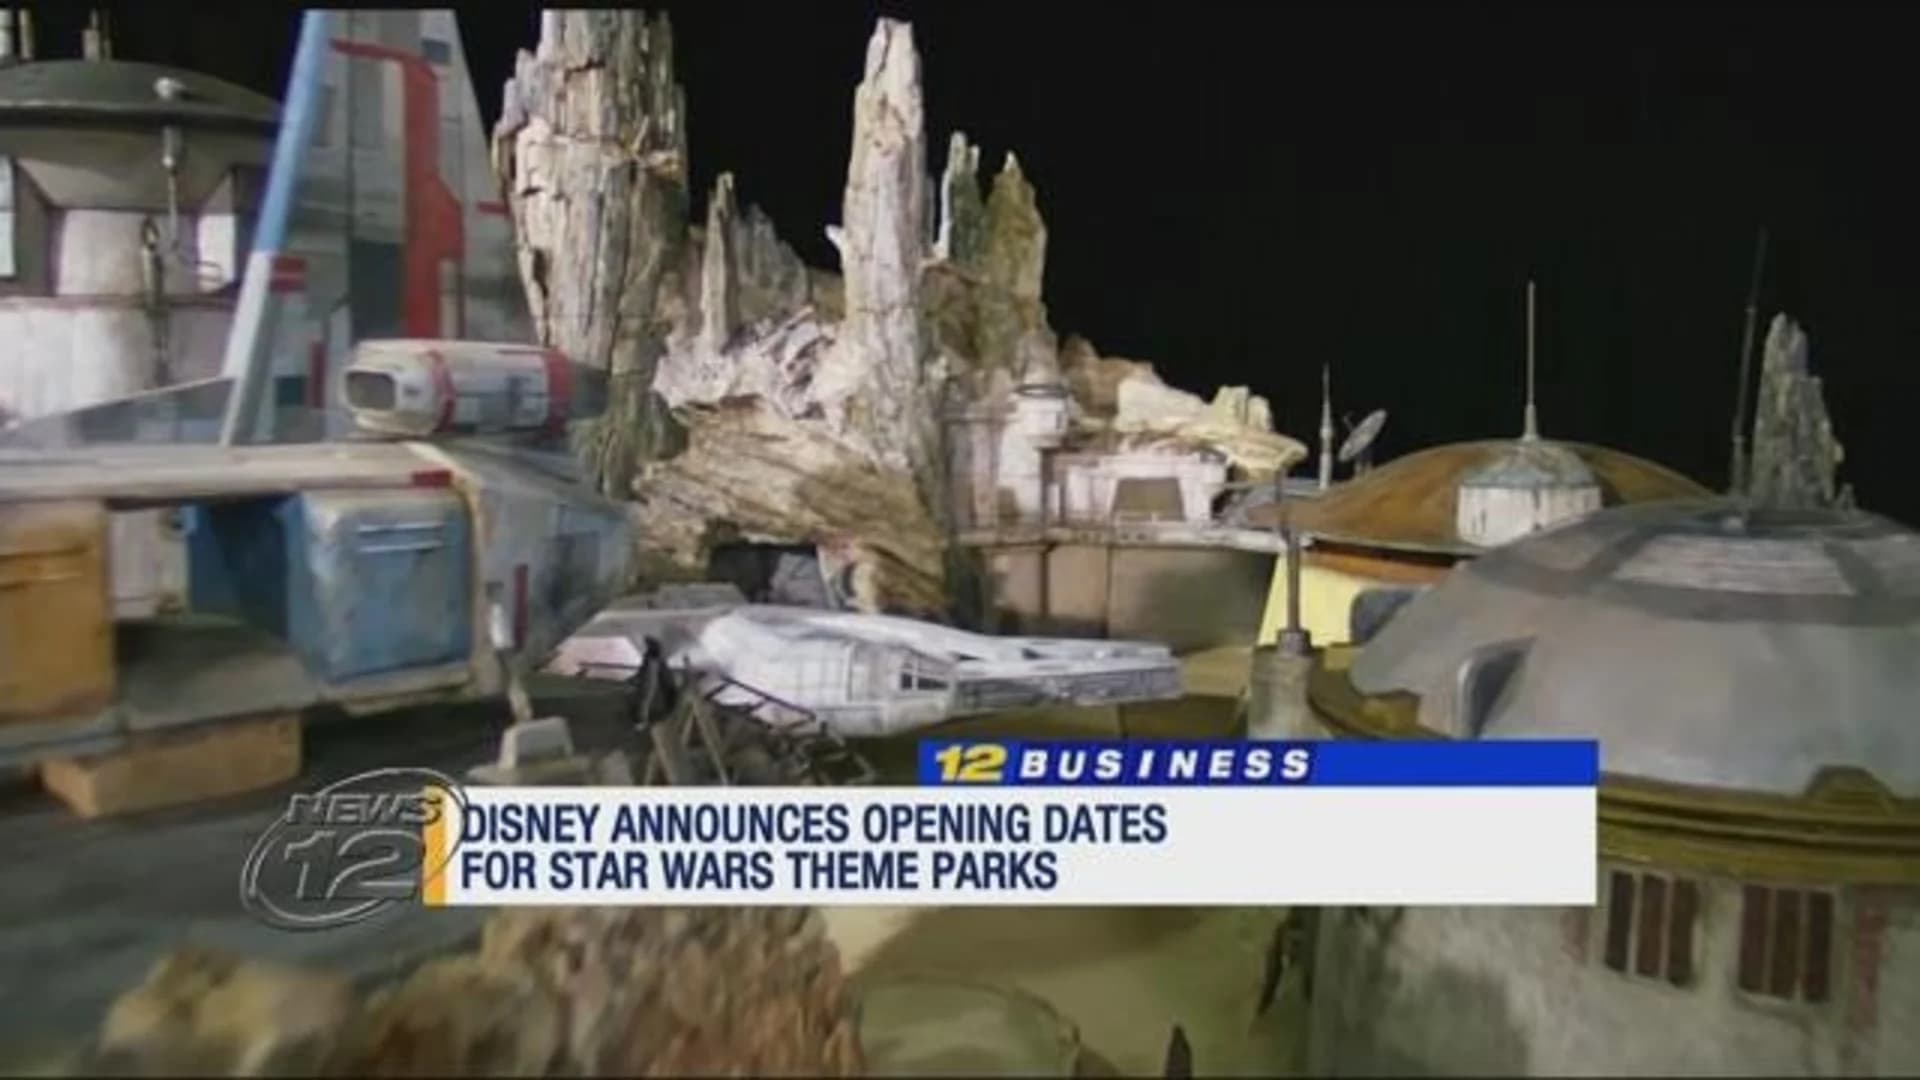 May the force be with Disney! – Star Wars attractions to open earlier than planned